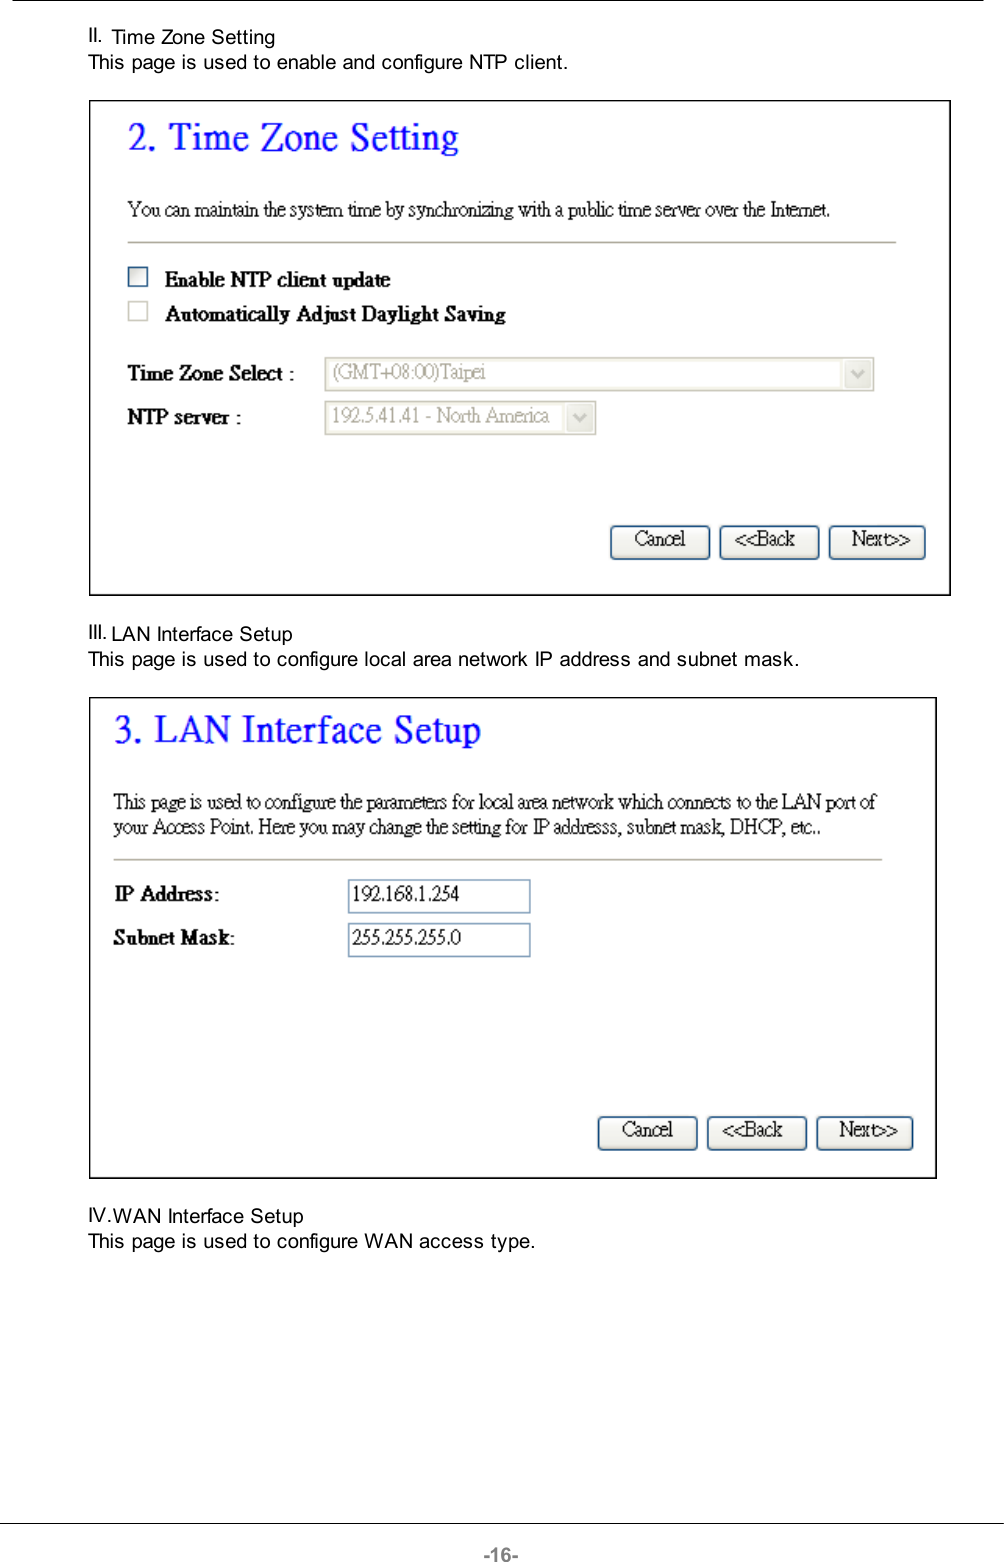 -16-II. Time Zone SettingThis page is used to enable and configure NTP client.III. LAN Interface SetupThis page is used to configure local area network IP address and subnet mask.IV.WAN Interface SetupThis page is used to configure WAN access type.